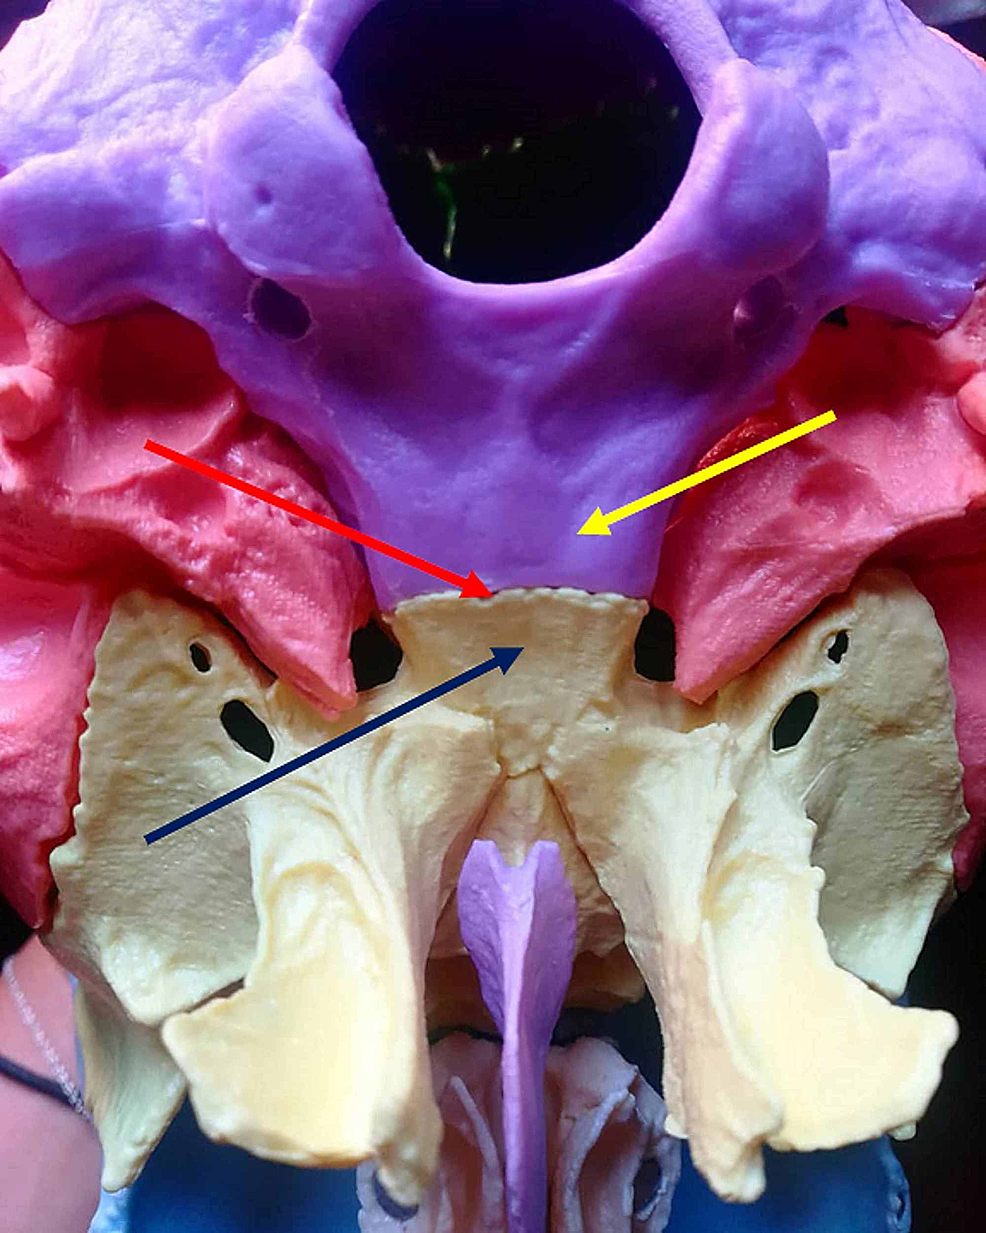 The-figure-illustrates-the-synchondrosis-articulation-between-the-occipital-bone-and-the-sphenoid-bone,-with-a-view-of-the-base-of-the-skull.-The-red-arrow-indicates-the-synchondrosis-articulation;-the-yellow-arrow-indicates-the-basiocciput;-the-blue-arrow-indicates-the-body-of-the-sphenoid.